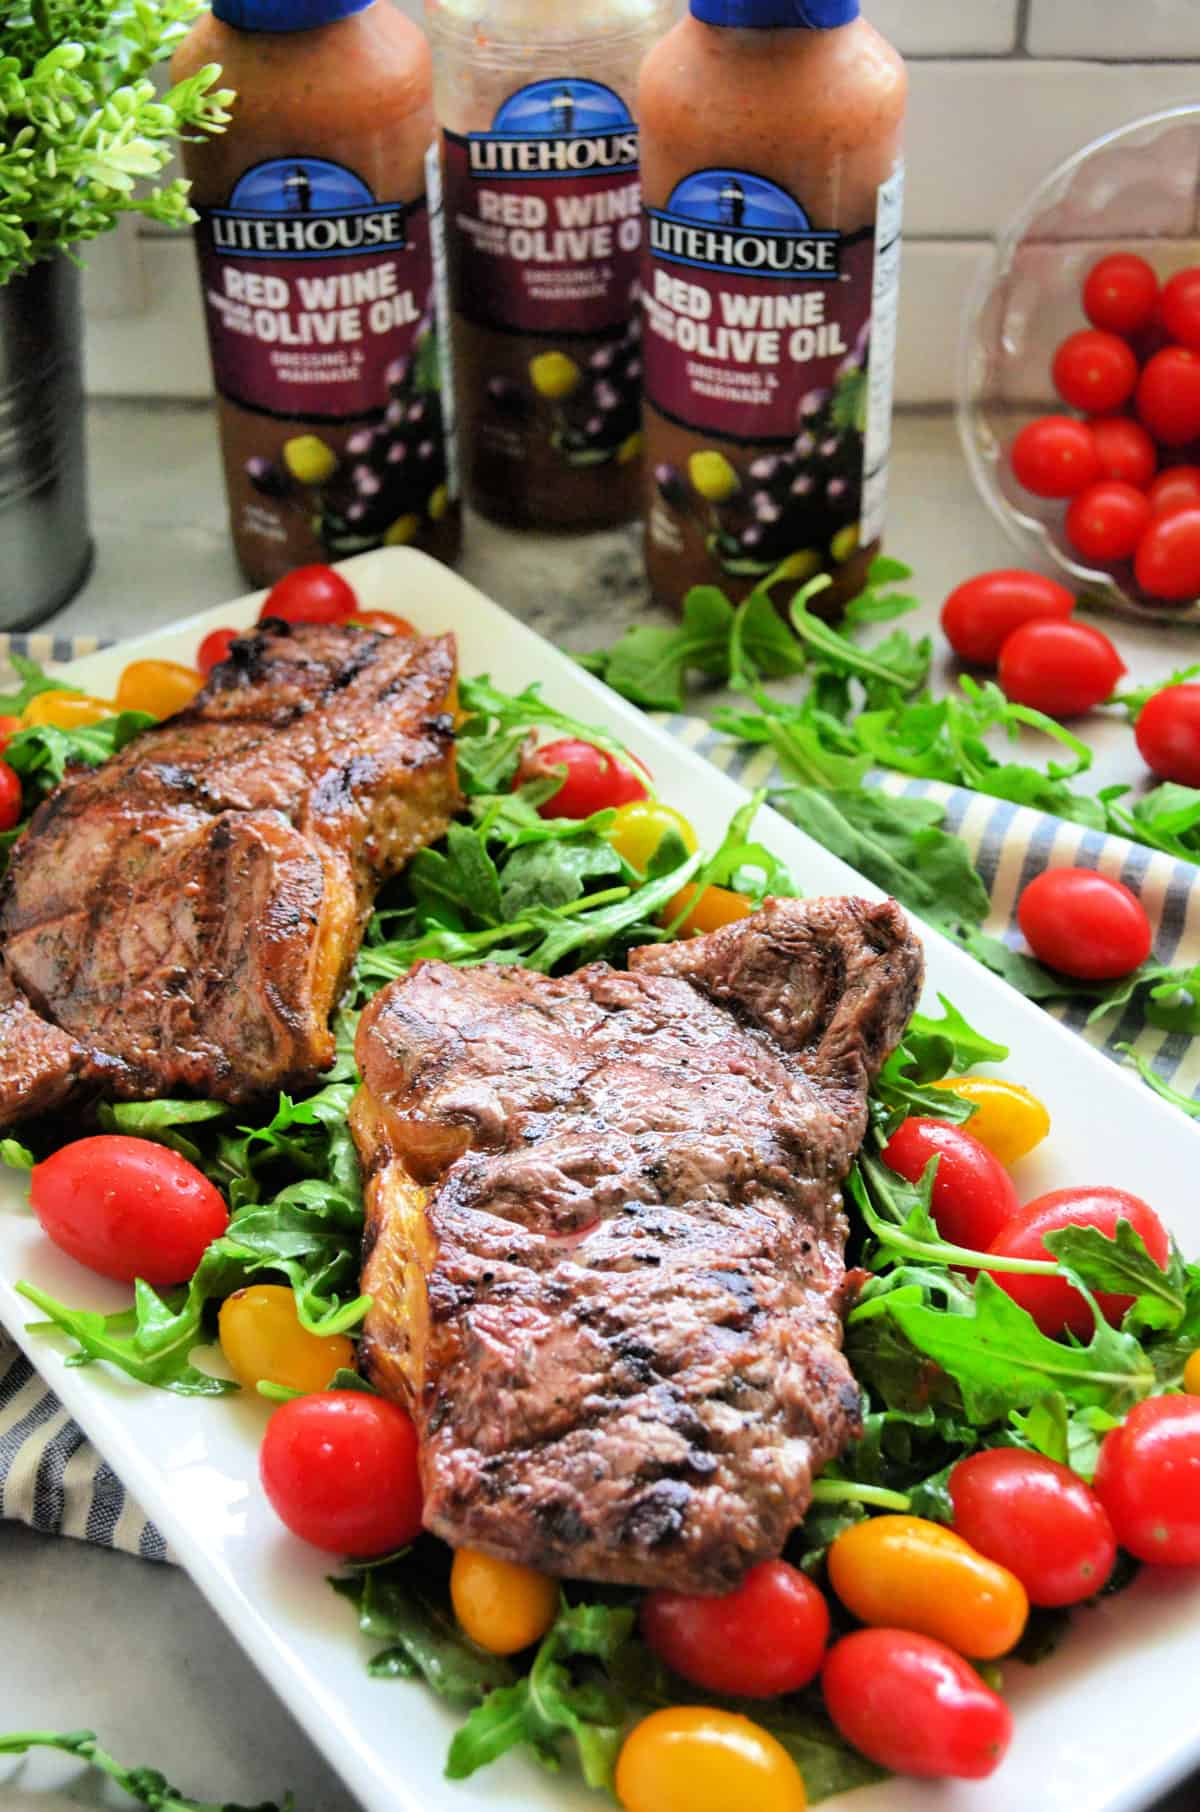 2 cooked steaks over bed of arugula salad with grape tomatoes with red wine olive oil dressing in background.